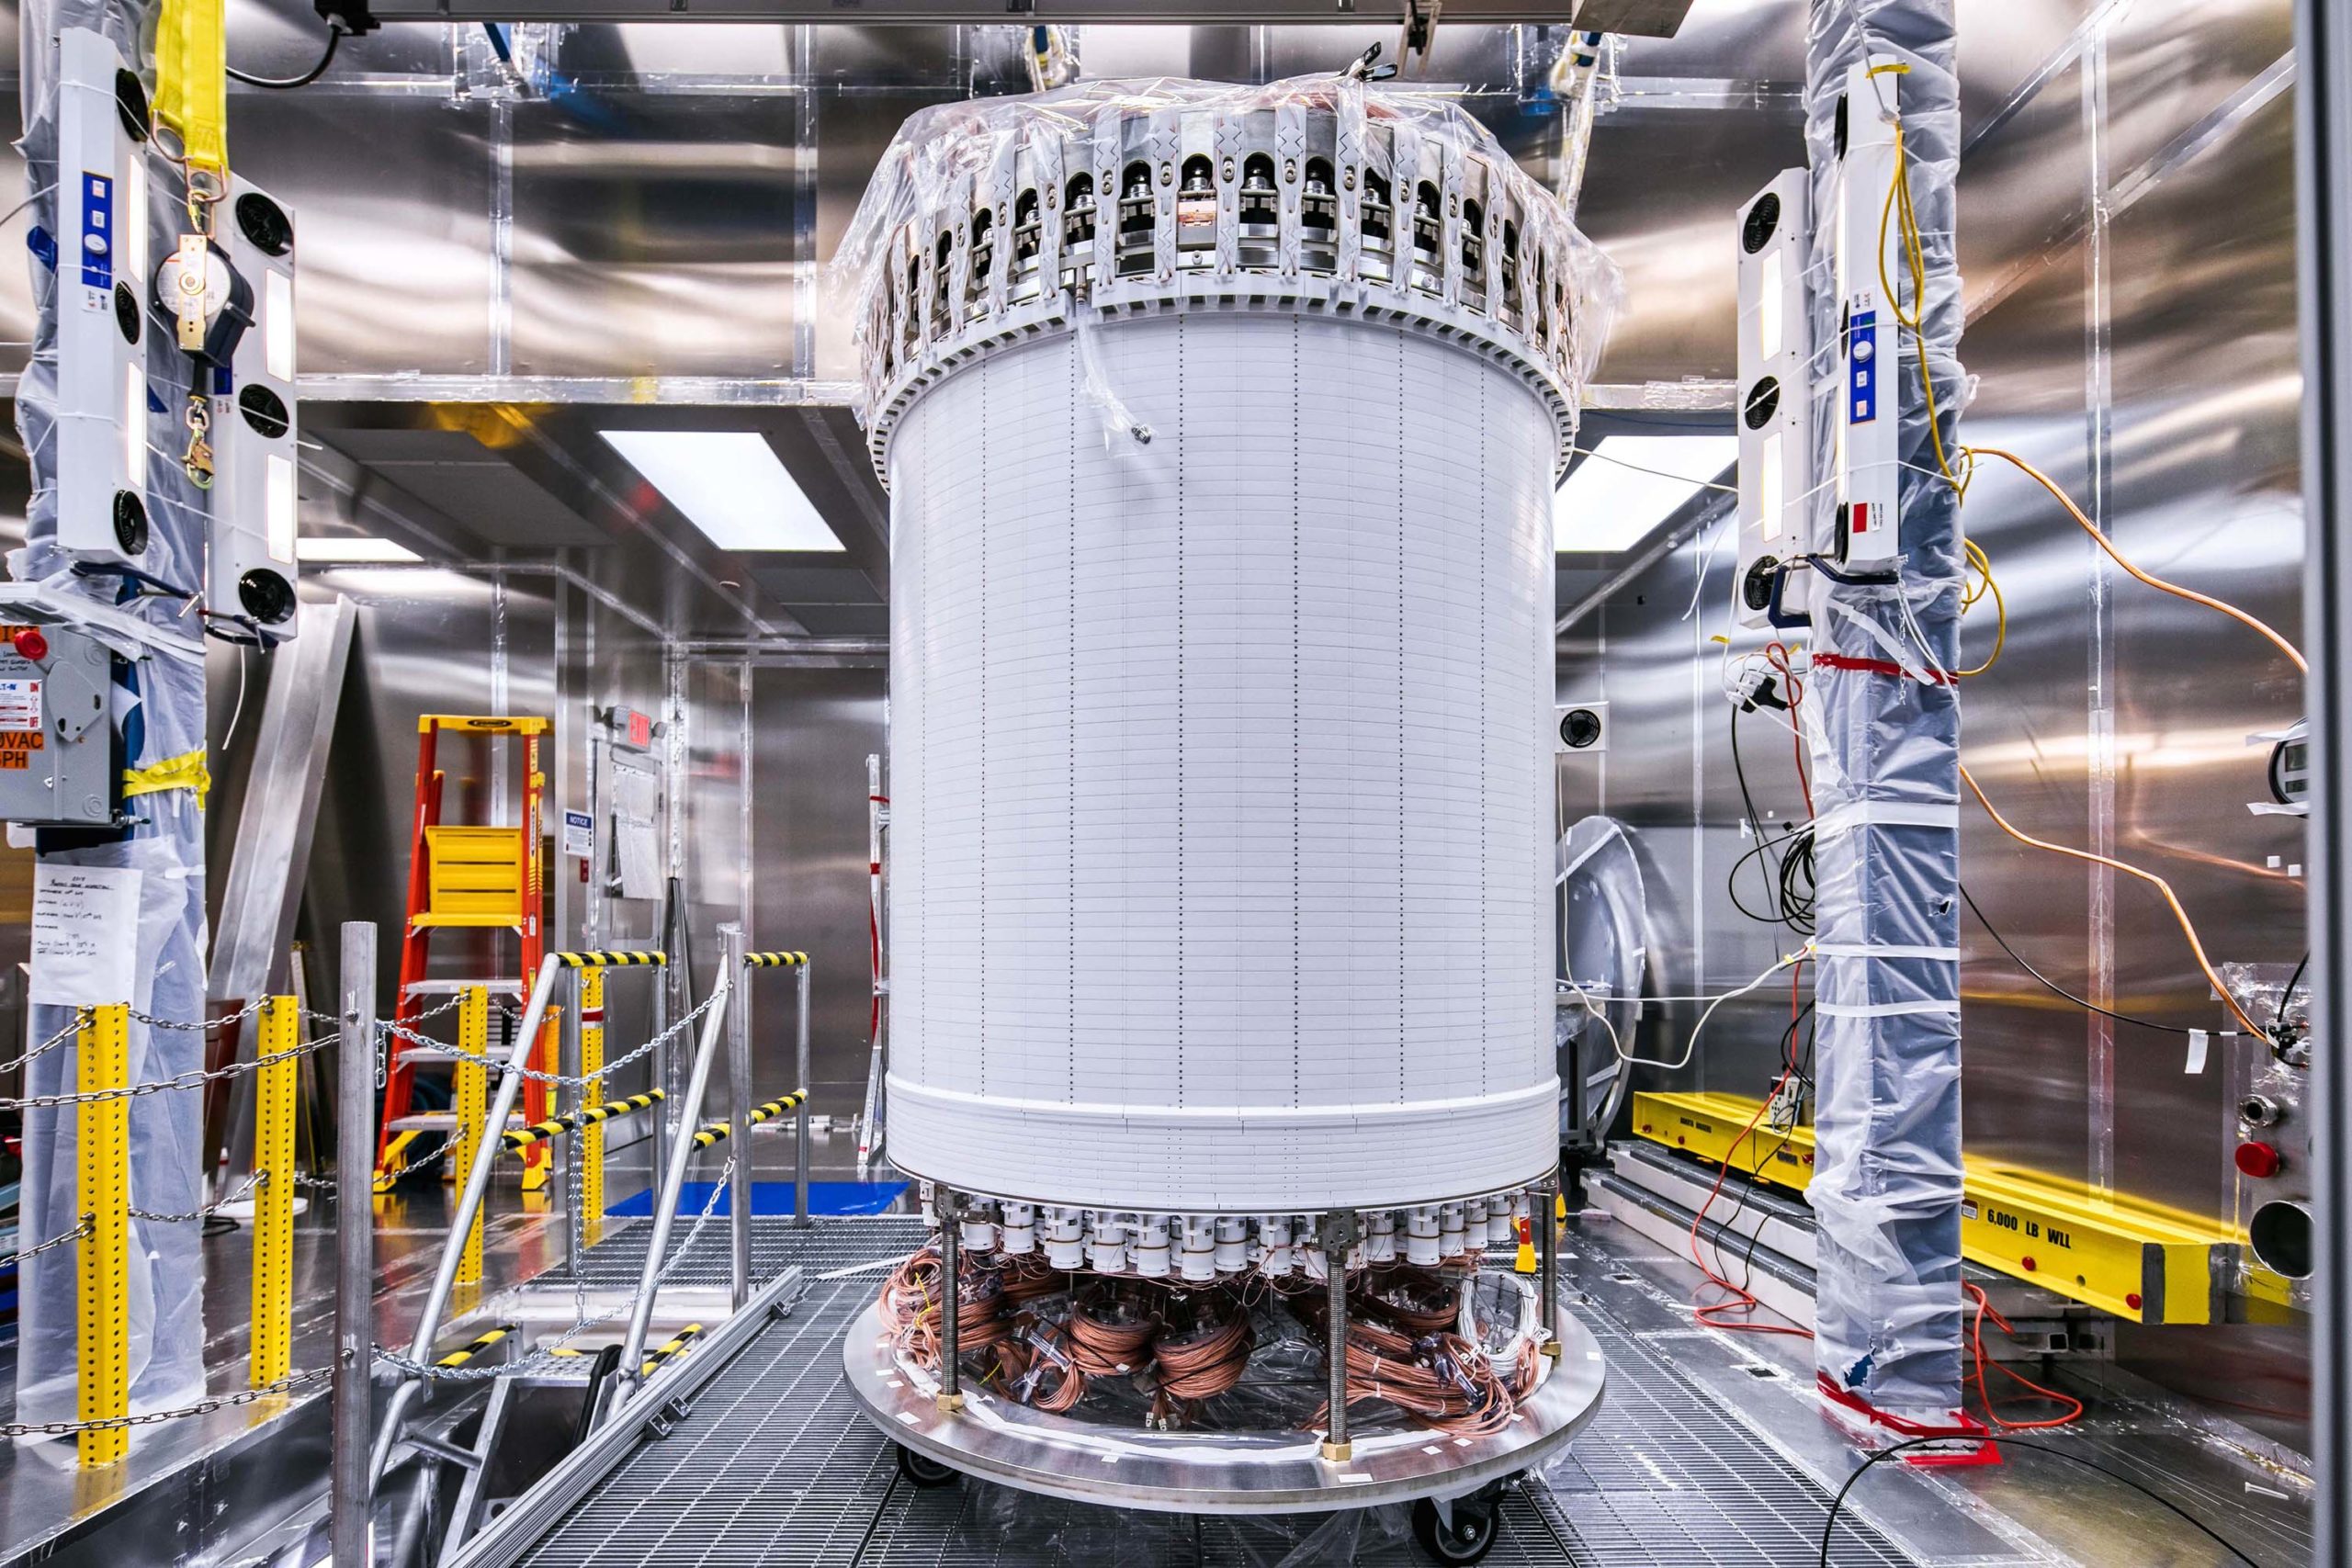 The LZ central detector in the clean room